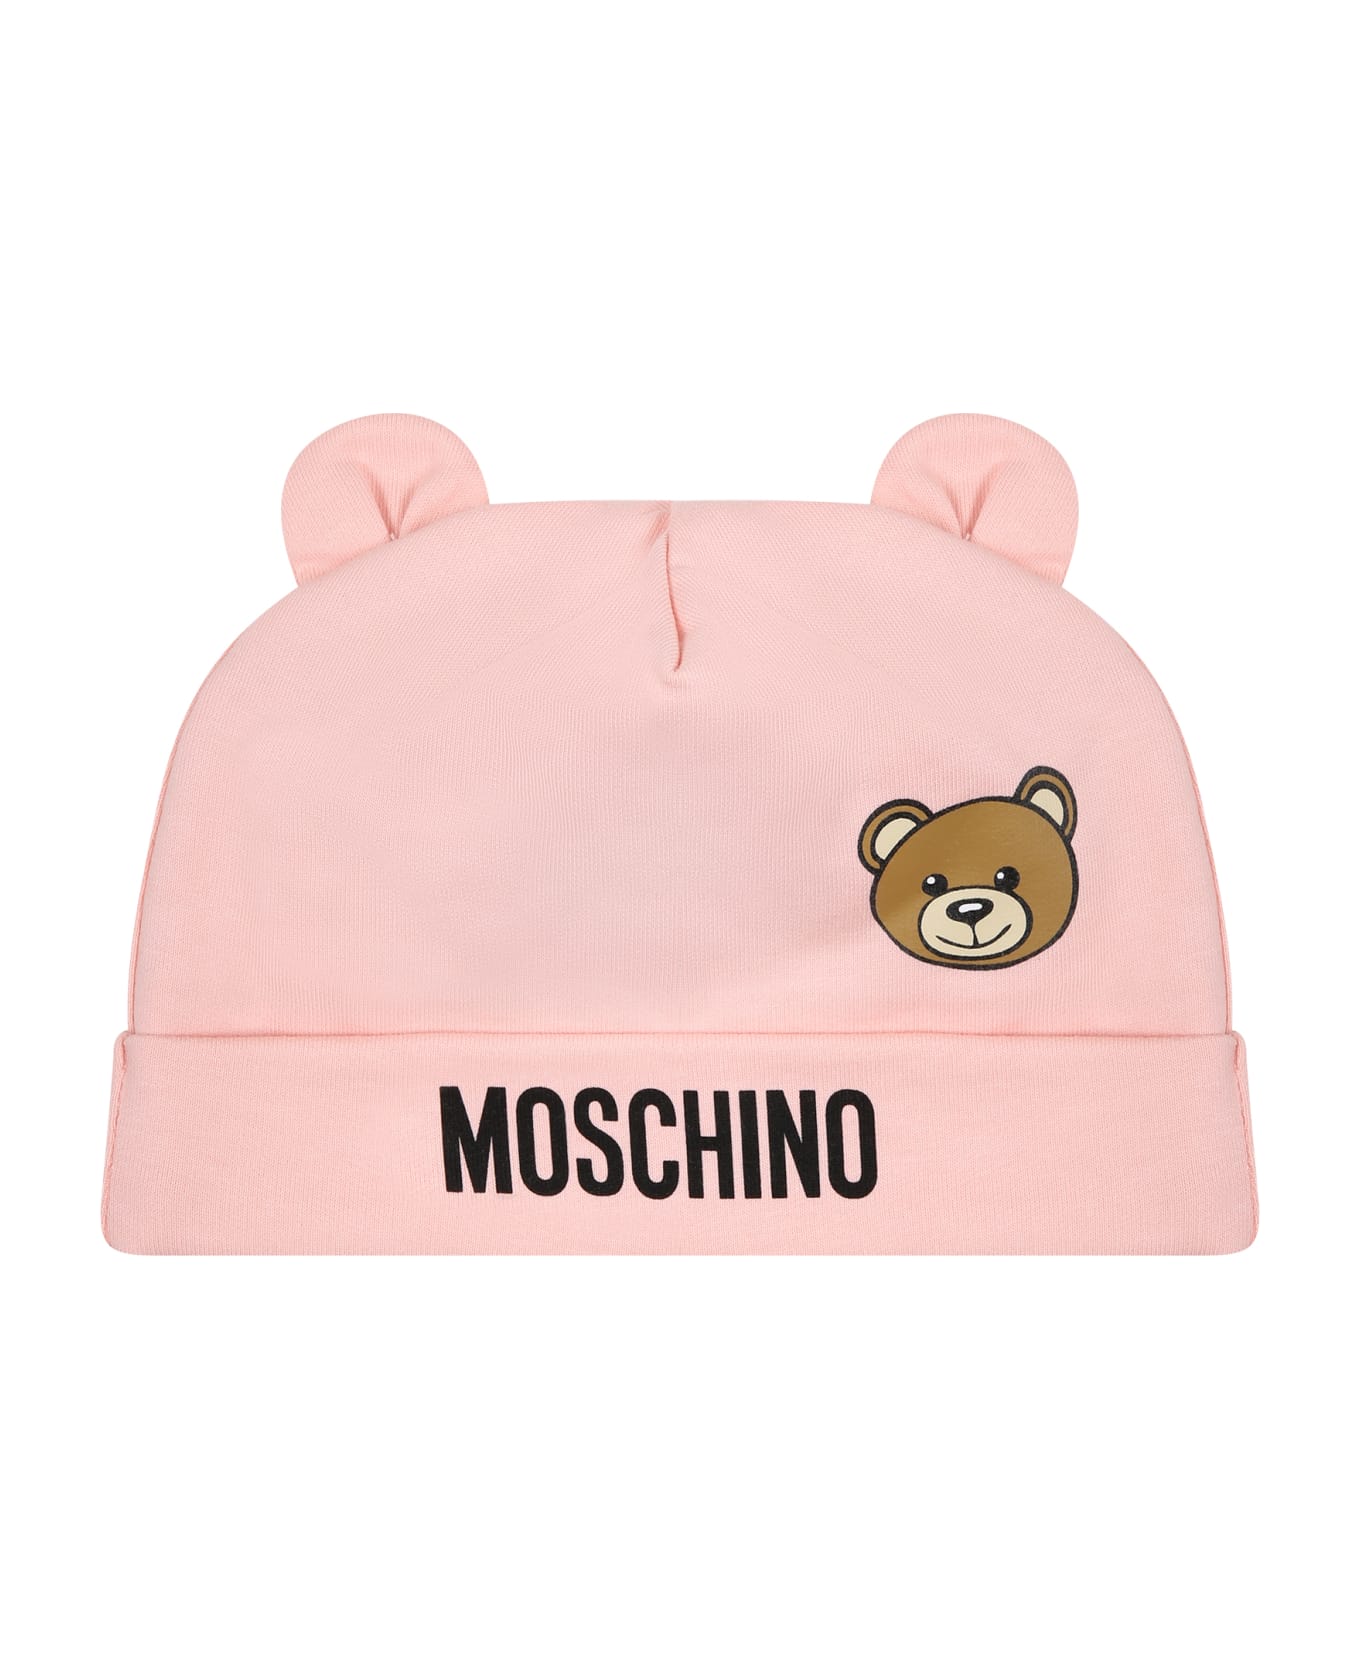 Moschino Pink Set For Baby Girl With Teddy Bear - Pink アクセサリー＆ギフト